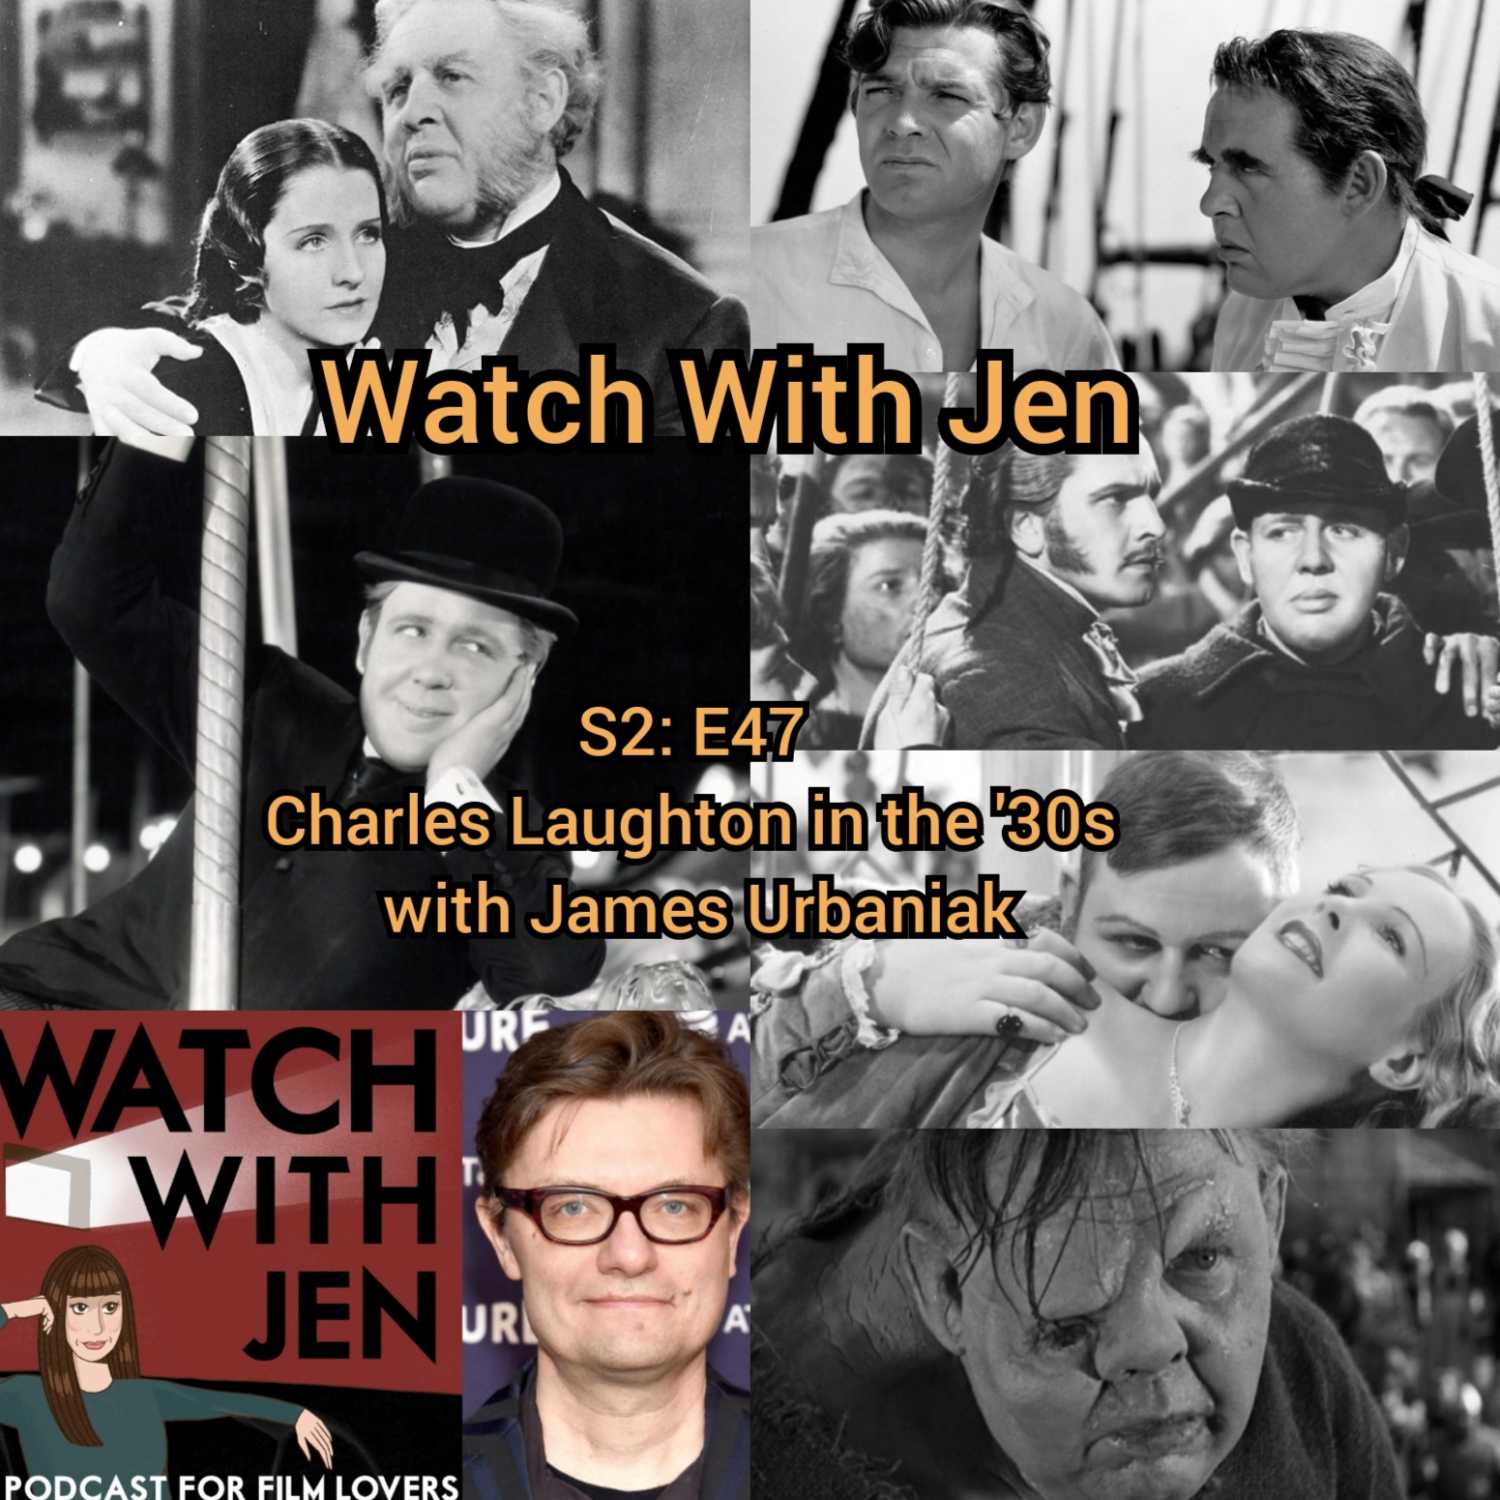 Watch With Jen - S2: E47 - Charles Laughton in the ’30s with James Urbaniak